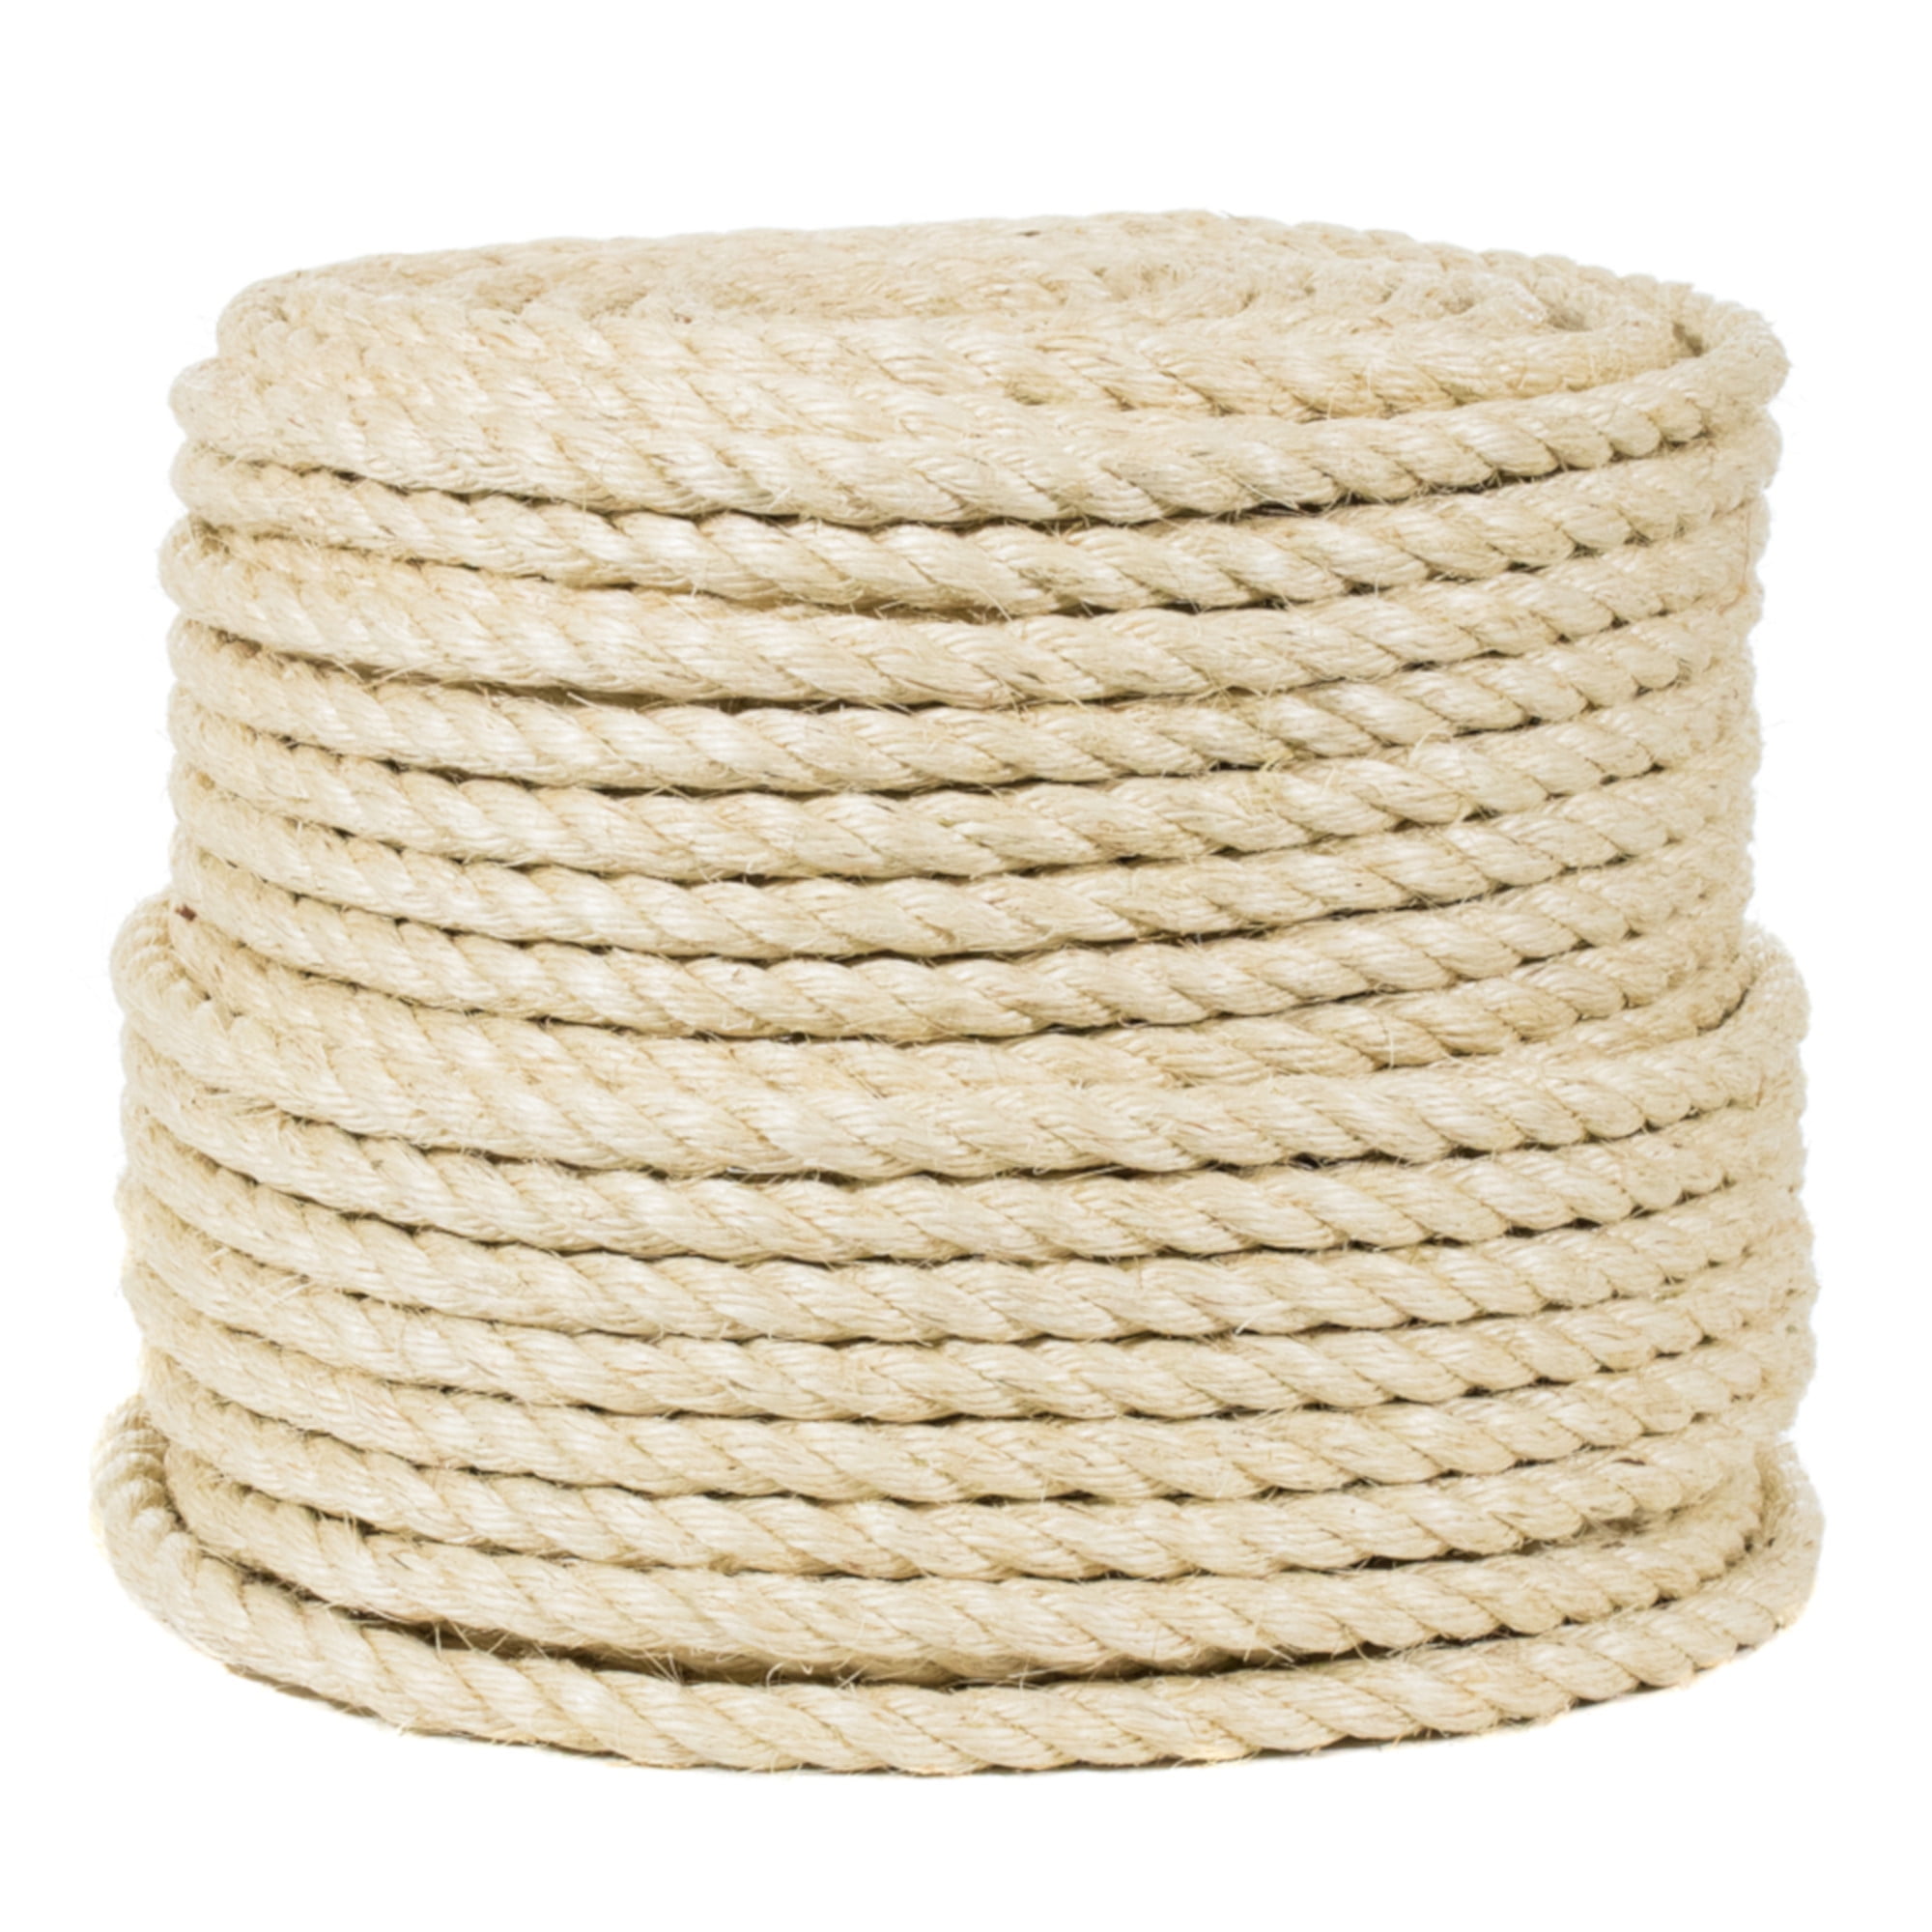 Evans Cordage 23-205 1/4-Inch by 50-Feet Twisted Sisal Rope T.W 